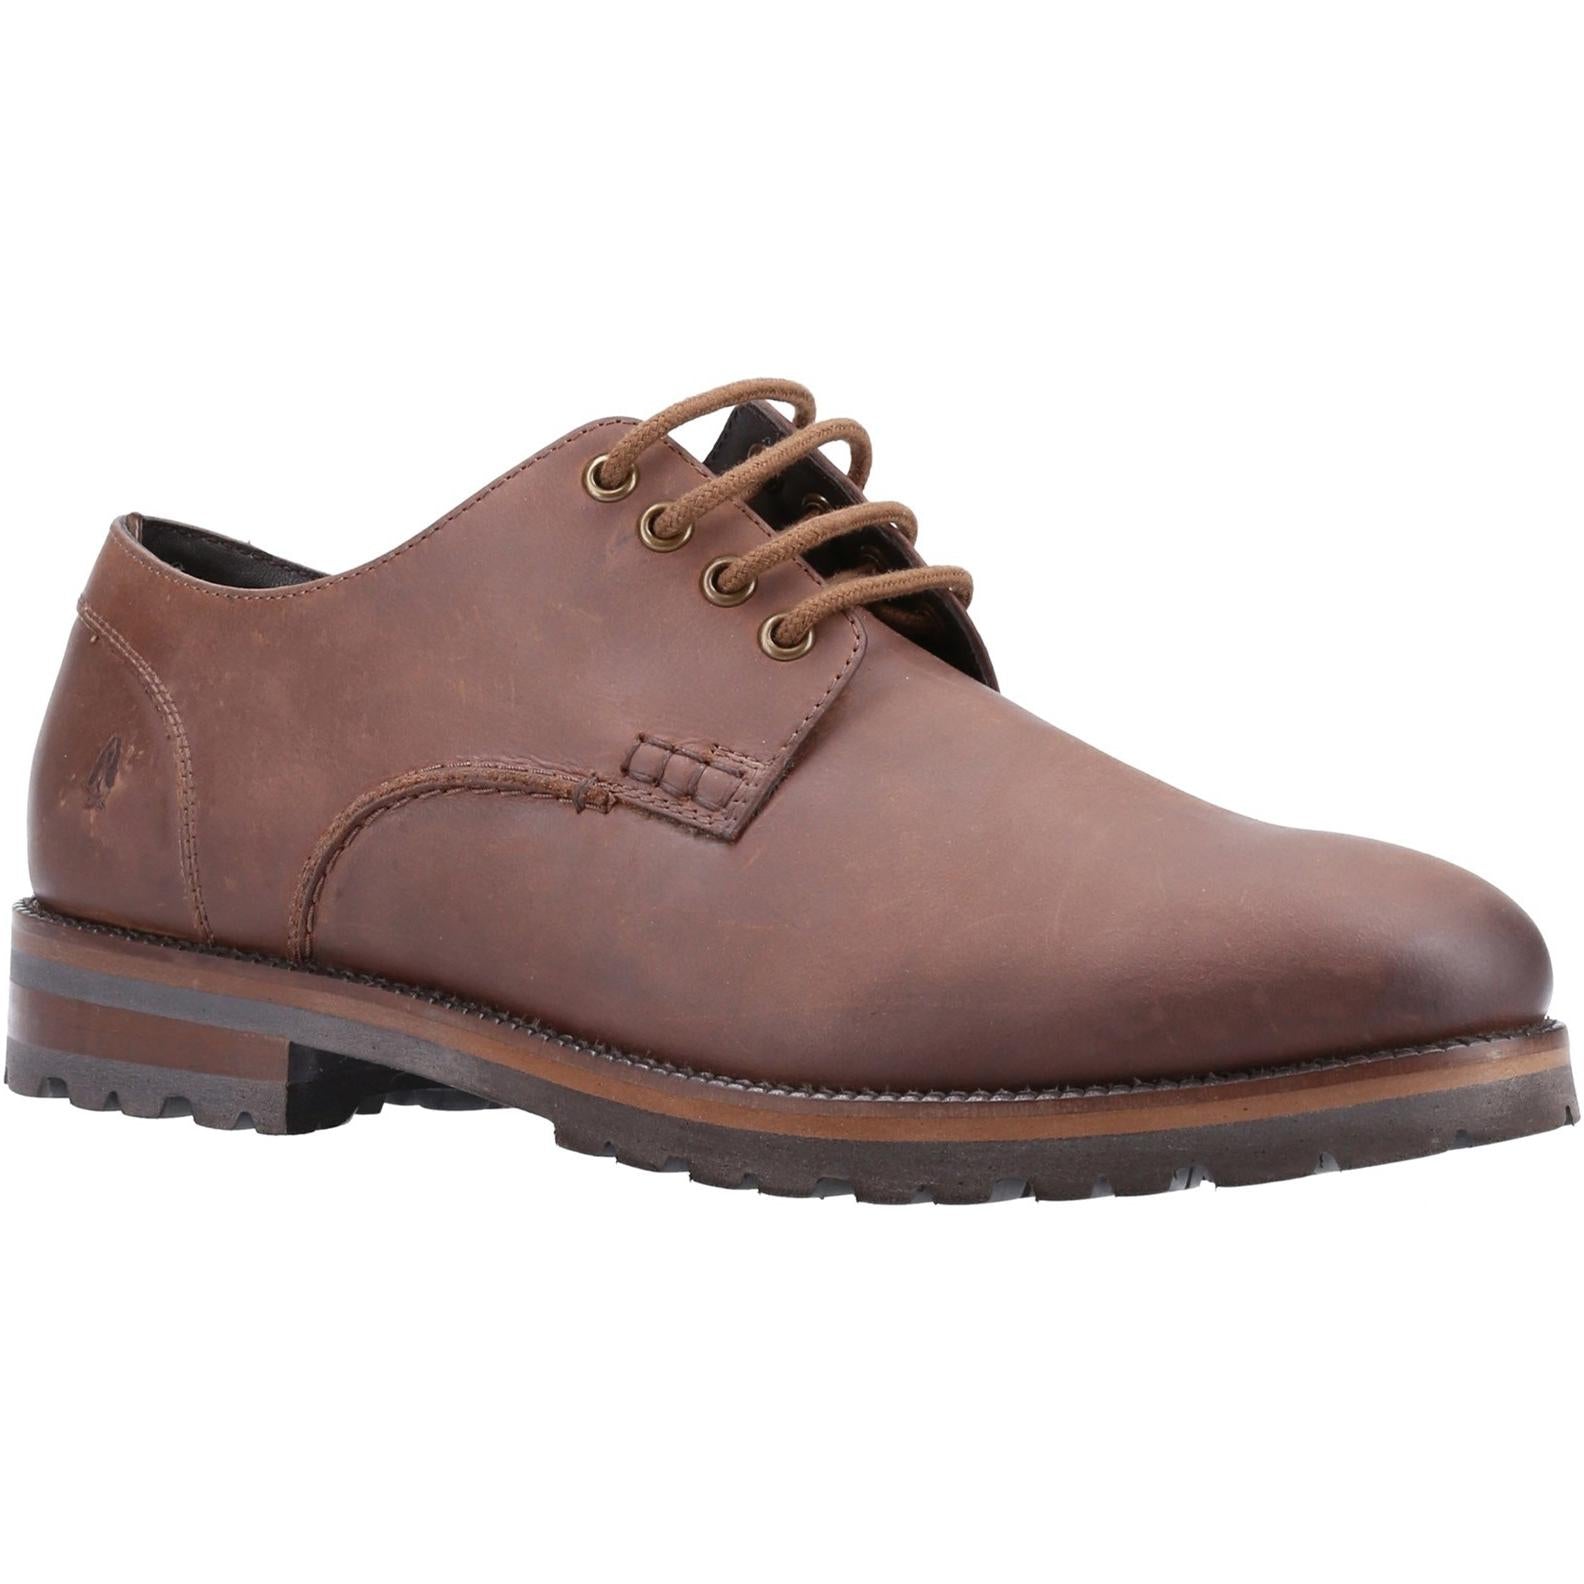 Hush Puppies Travis Lace Up Shoes